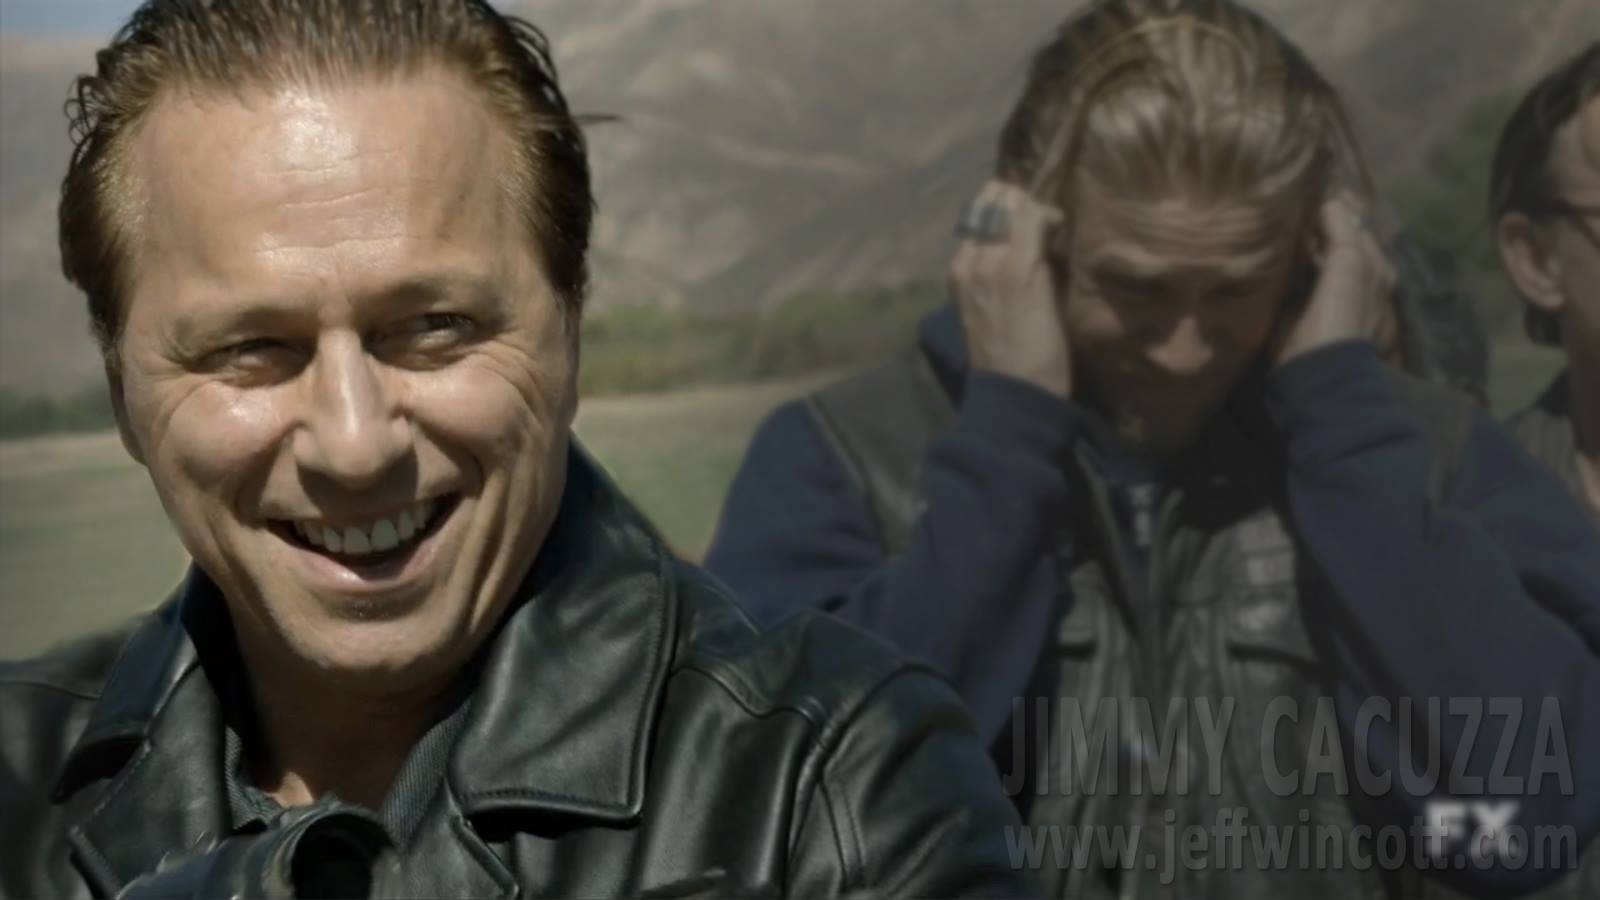 Still of Jeff Wincott as Jimmy Cacuzza and Charlie Hunnam in Sons Of Anarchy (2013)